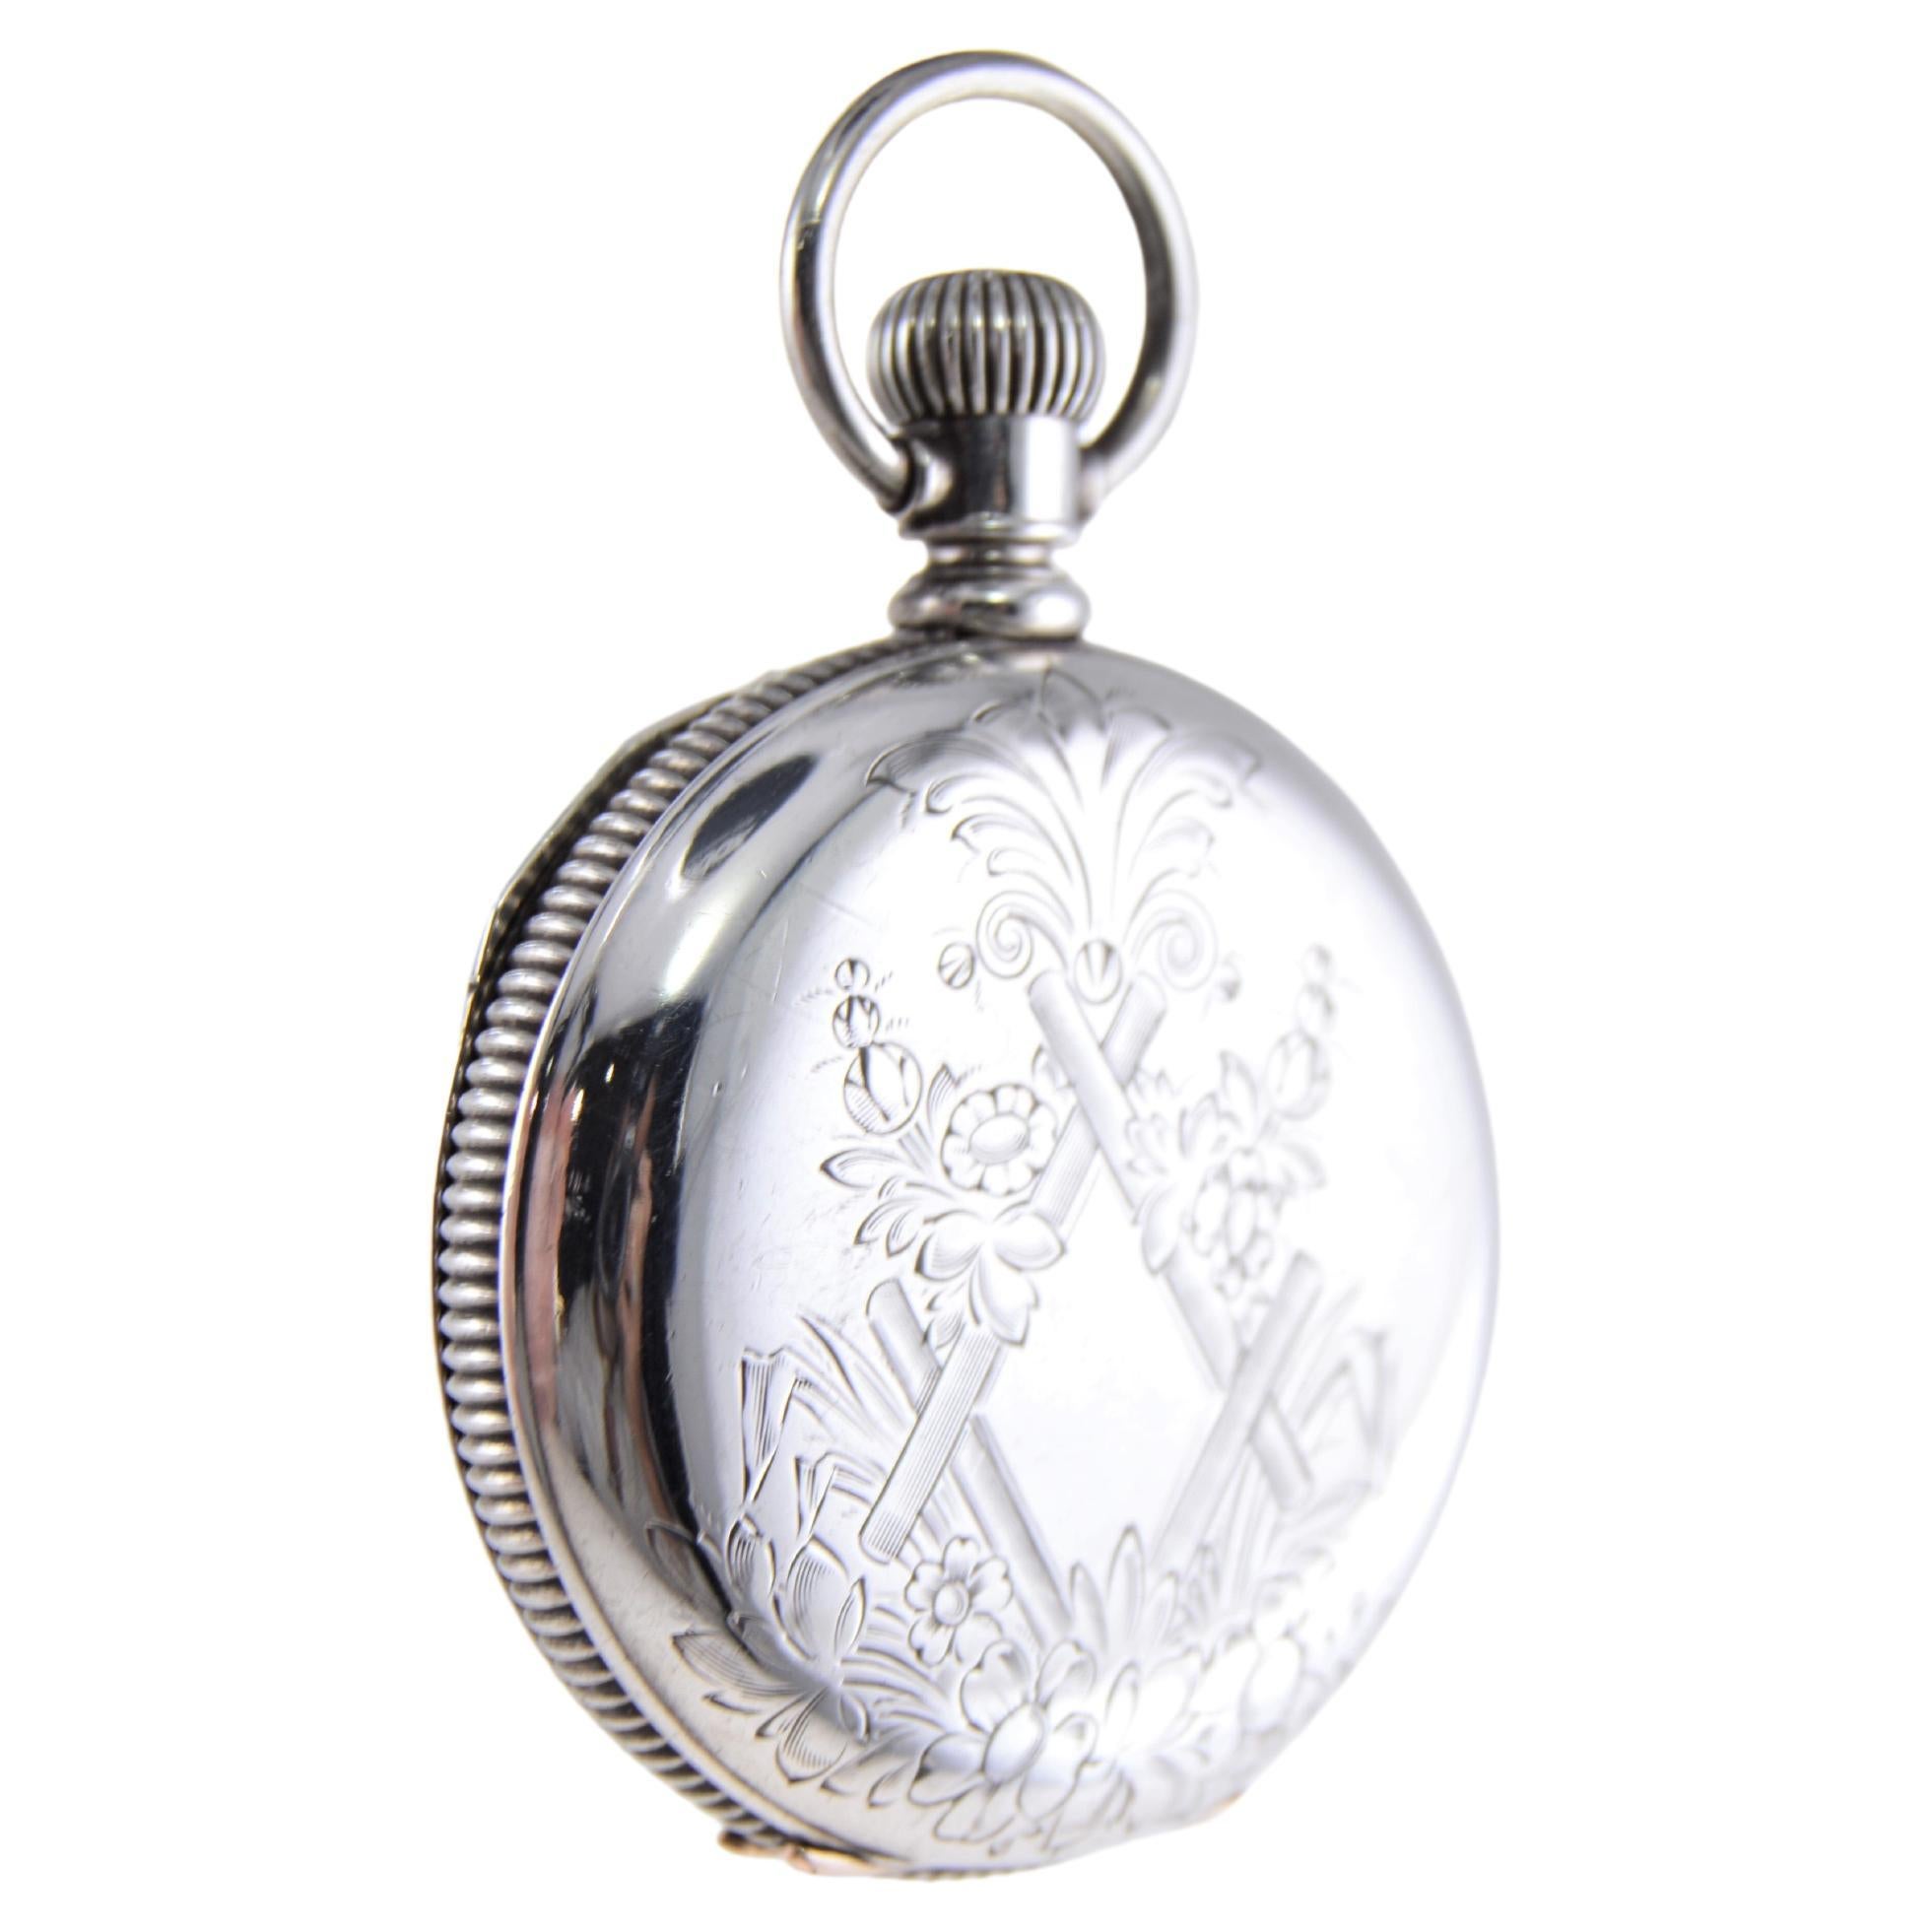 Illinois Silver Hunters Case Pocket Watch from 1893 with Pocket Watch Chain  3